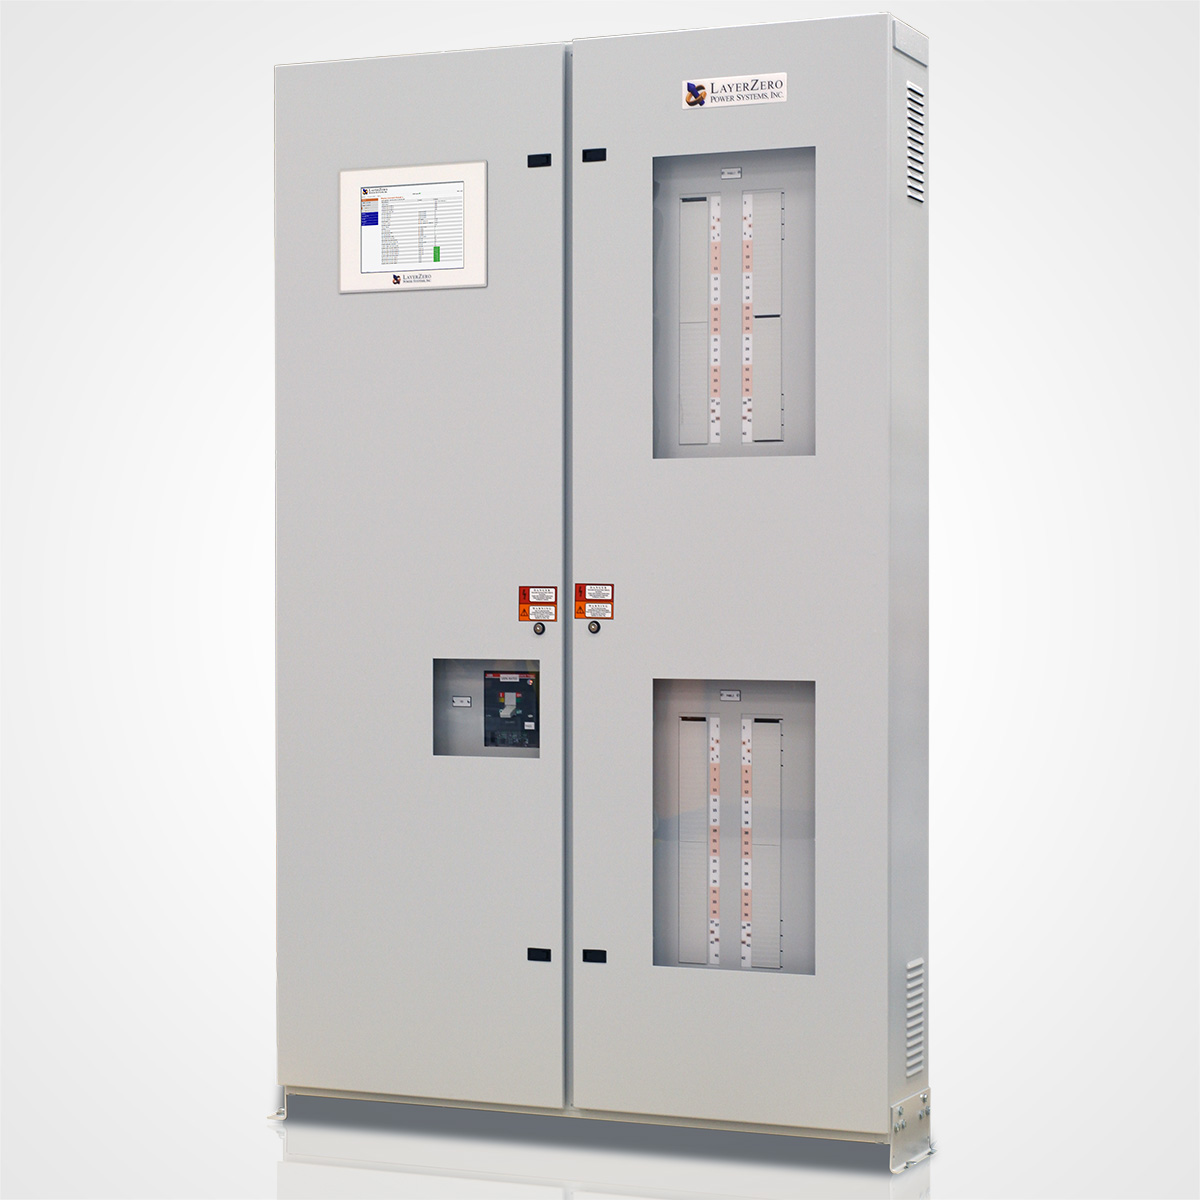 The LayerZero Series 70: ePanel-2 Front Angle with a Single Main Circuit Breaker.